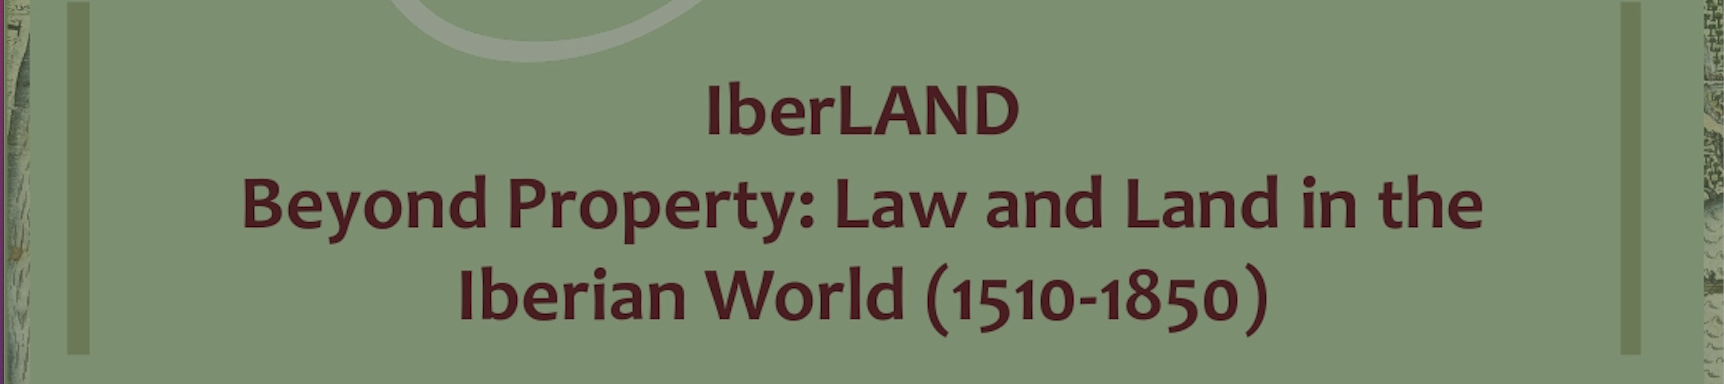 IberLAND. Beyond Property: Law and Land in the Iberian World (1510-1850)